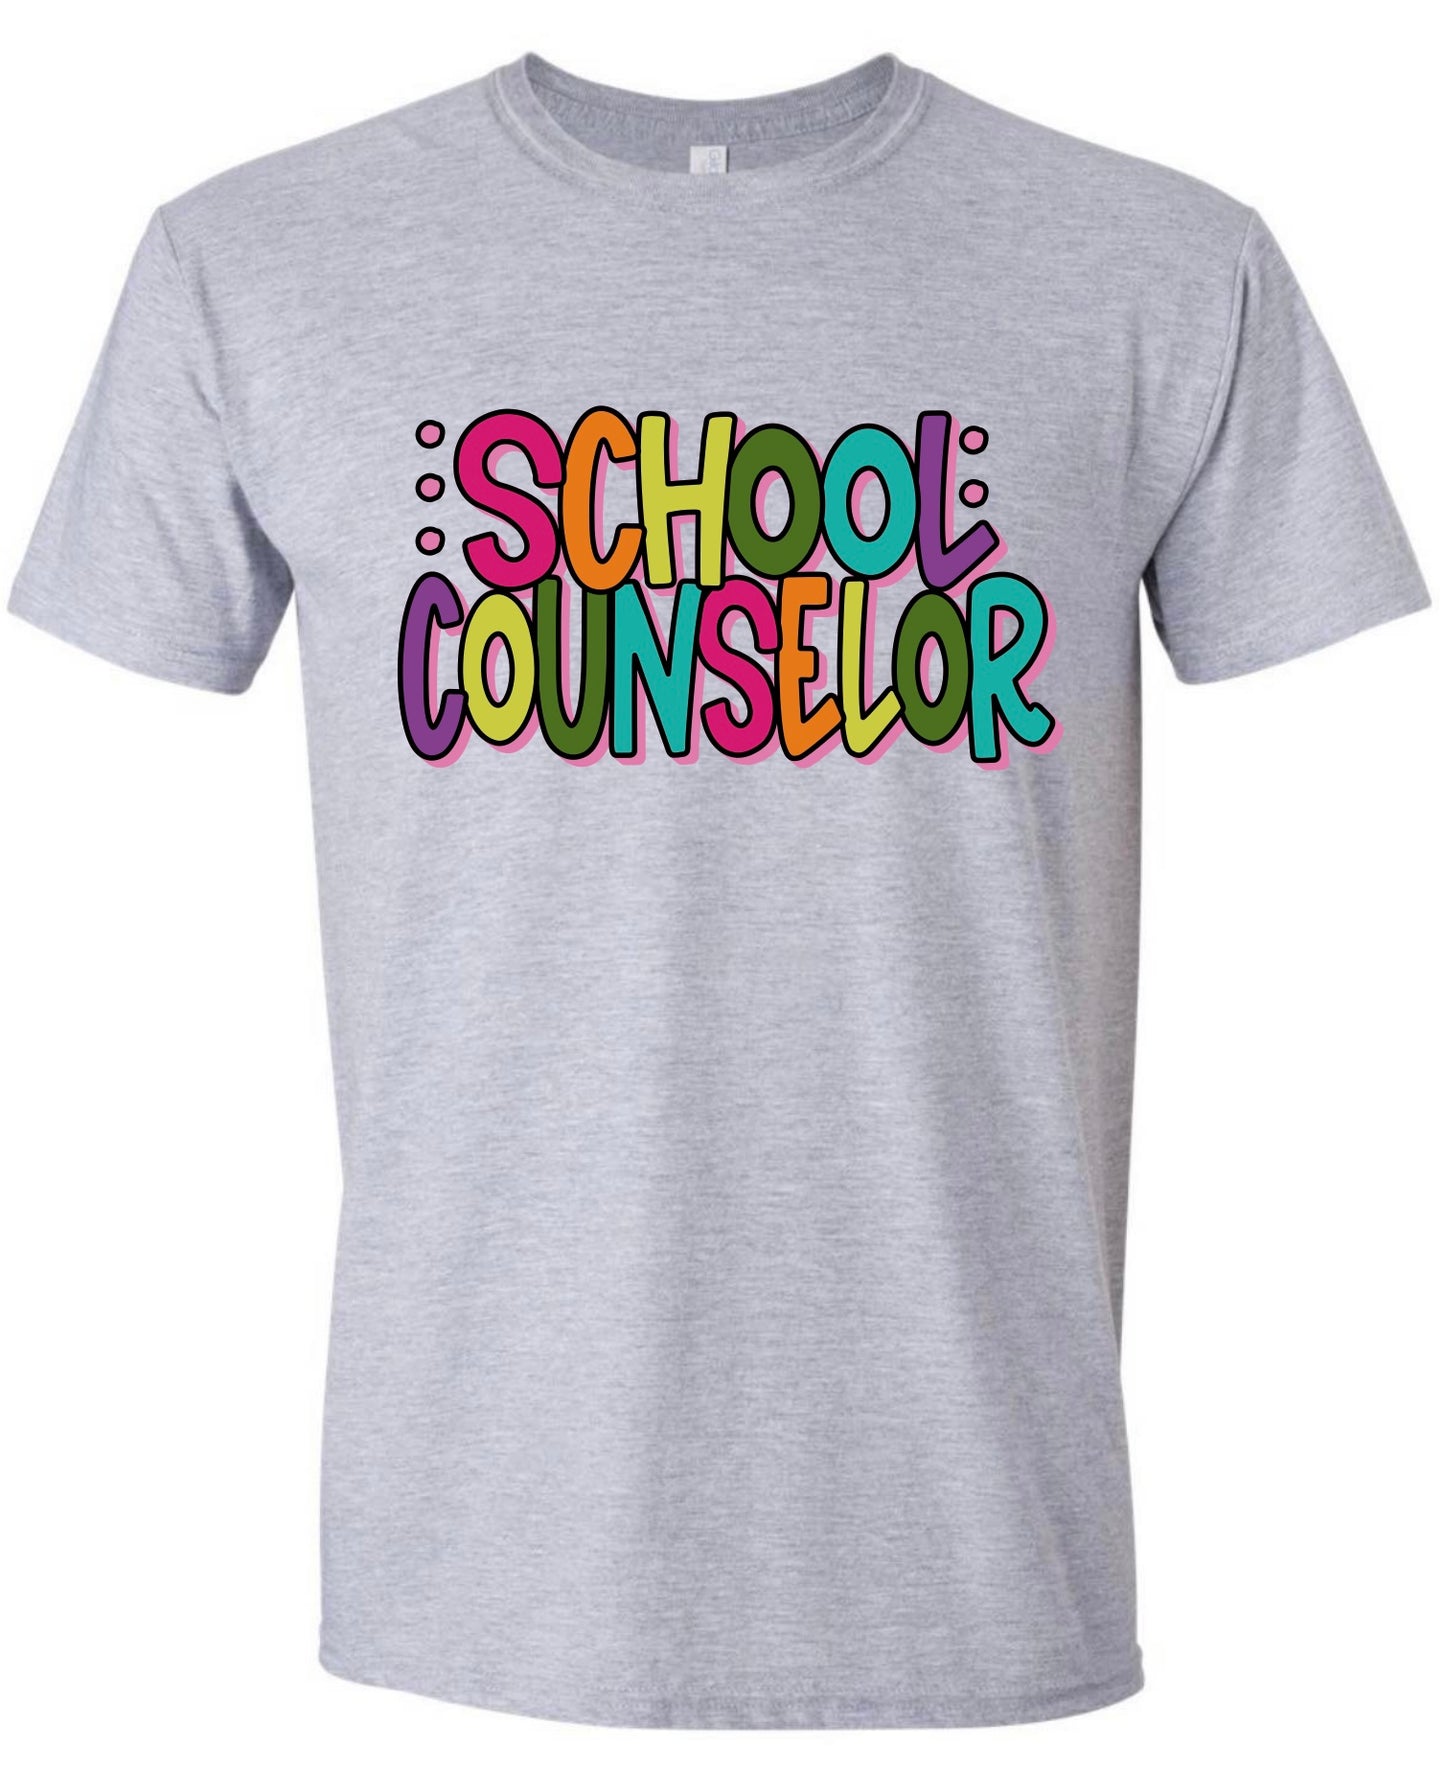 Colorful School Counselor Tshirt